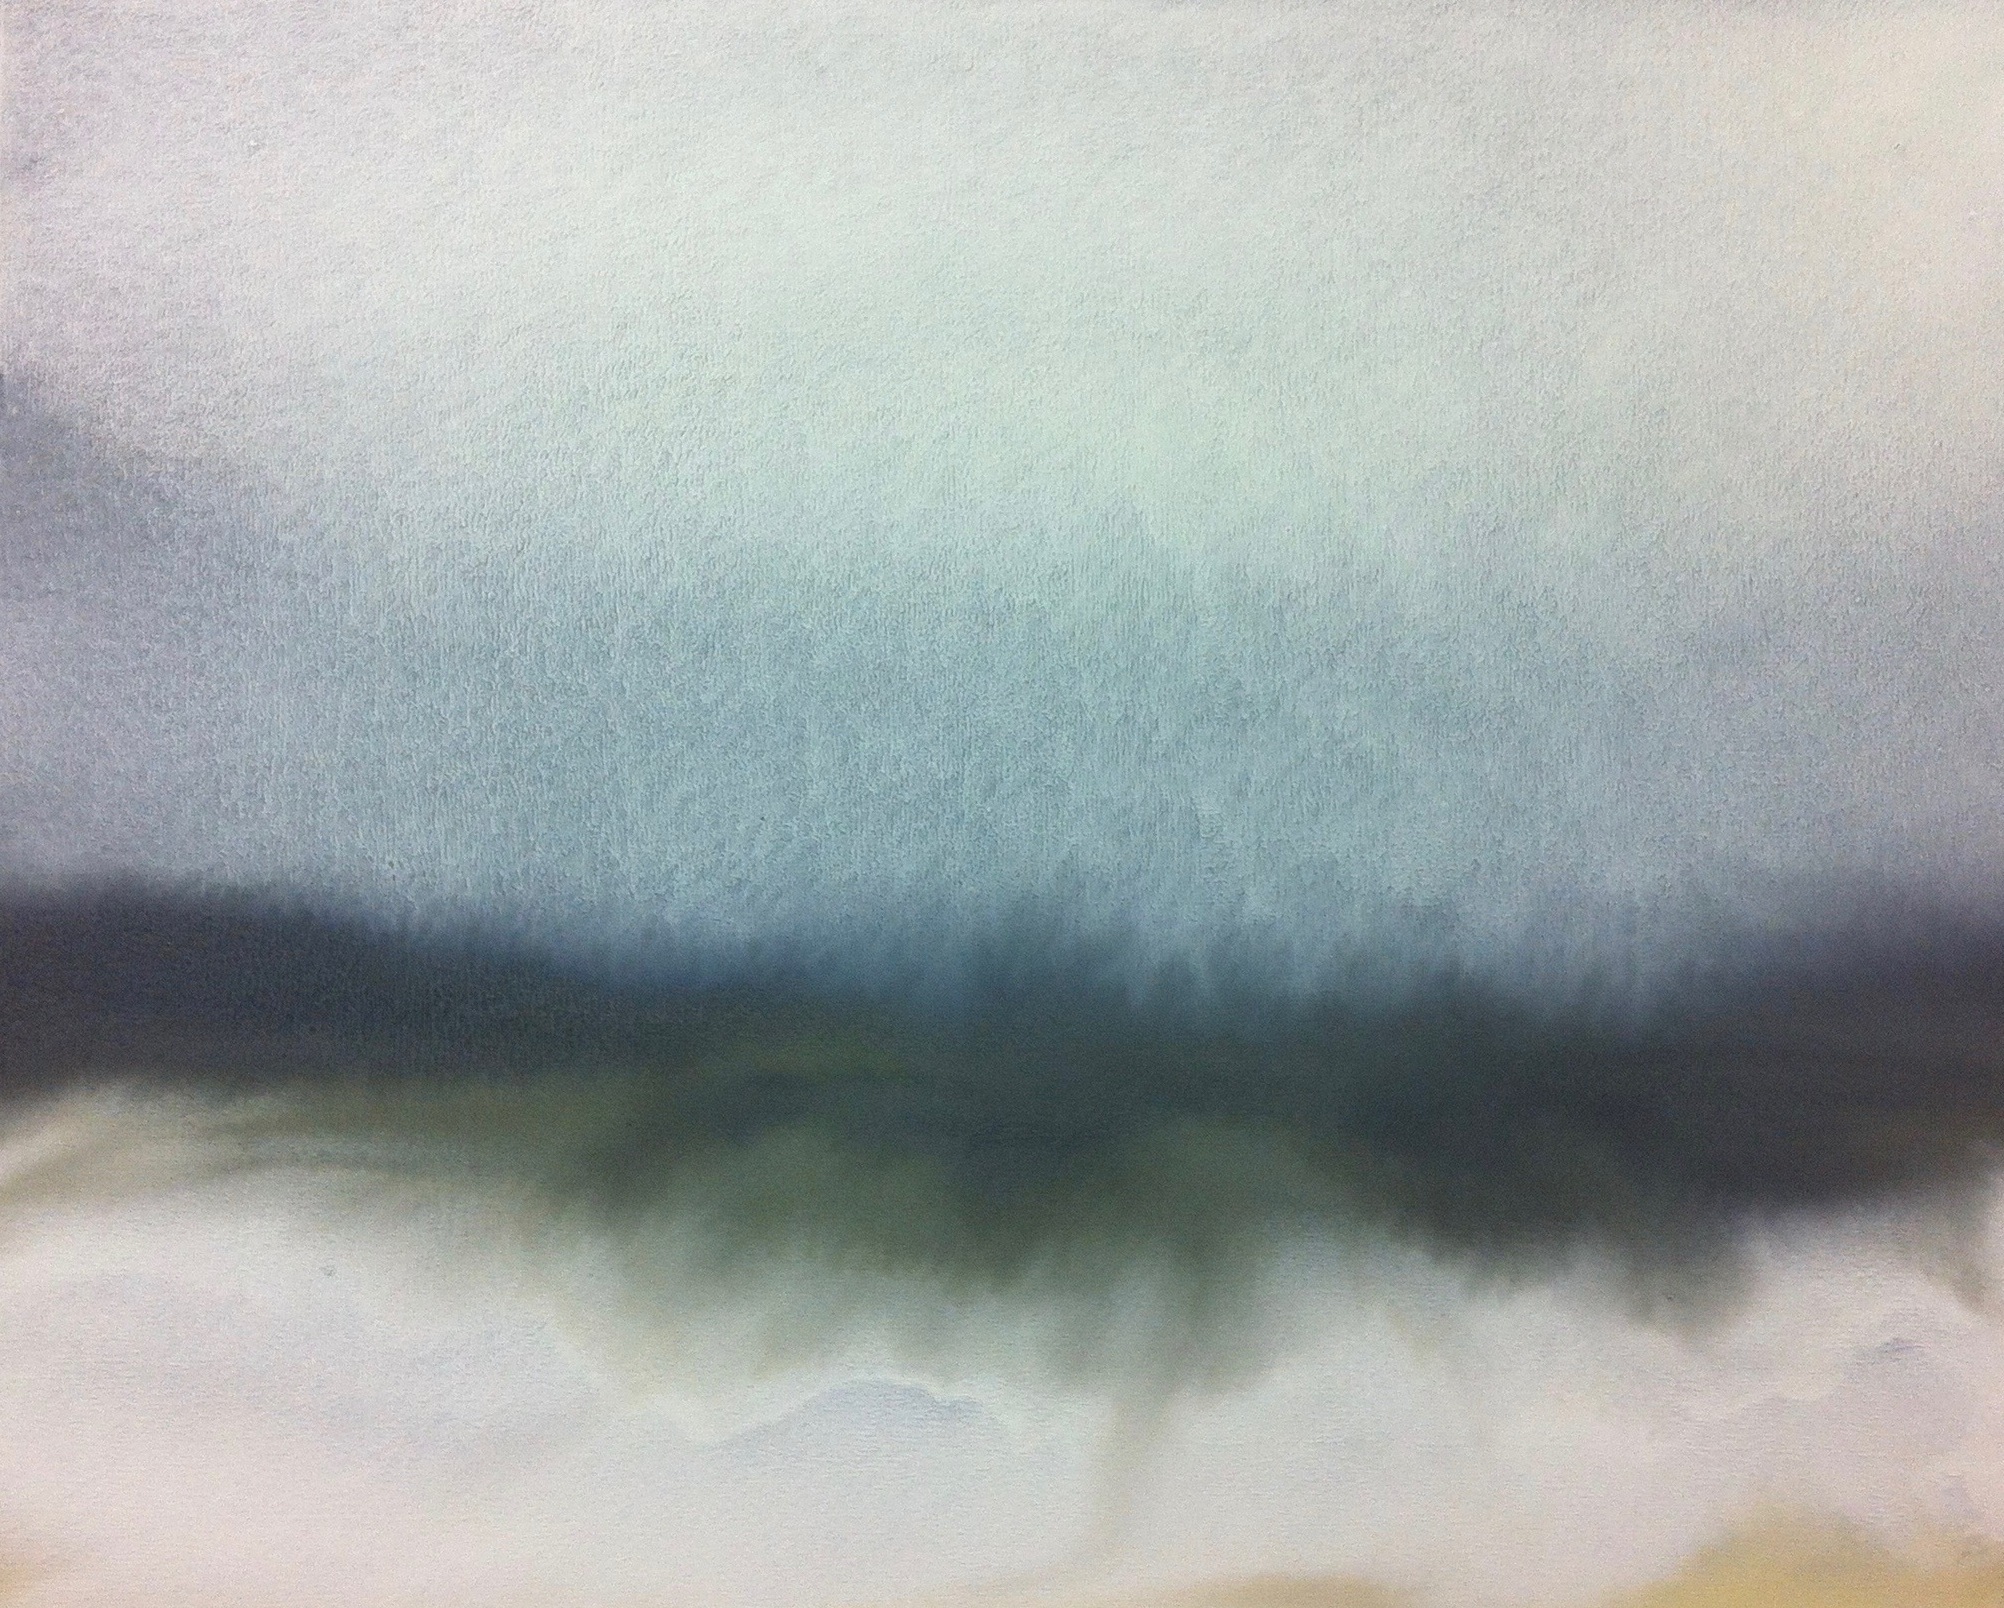  Big Waves at Georgica Beach, East Hampton, 2012. Oil on Paper (Diptych), 31.75" x 39.75" each.  Francis J. Greenburger / Art in Buildings Collection. 